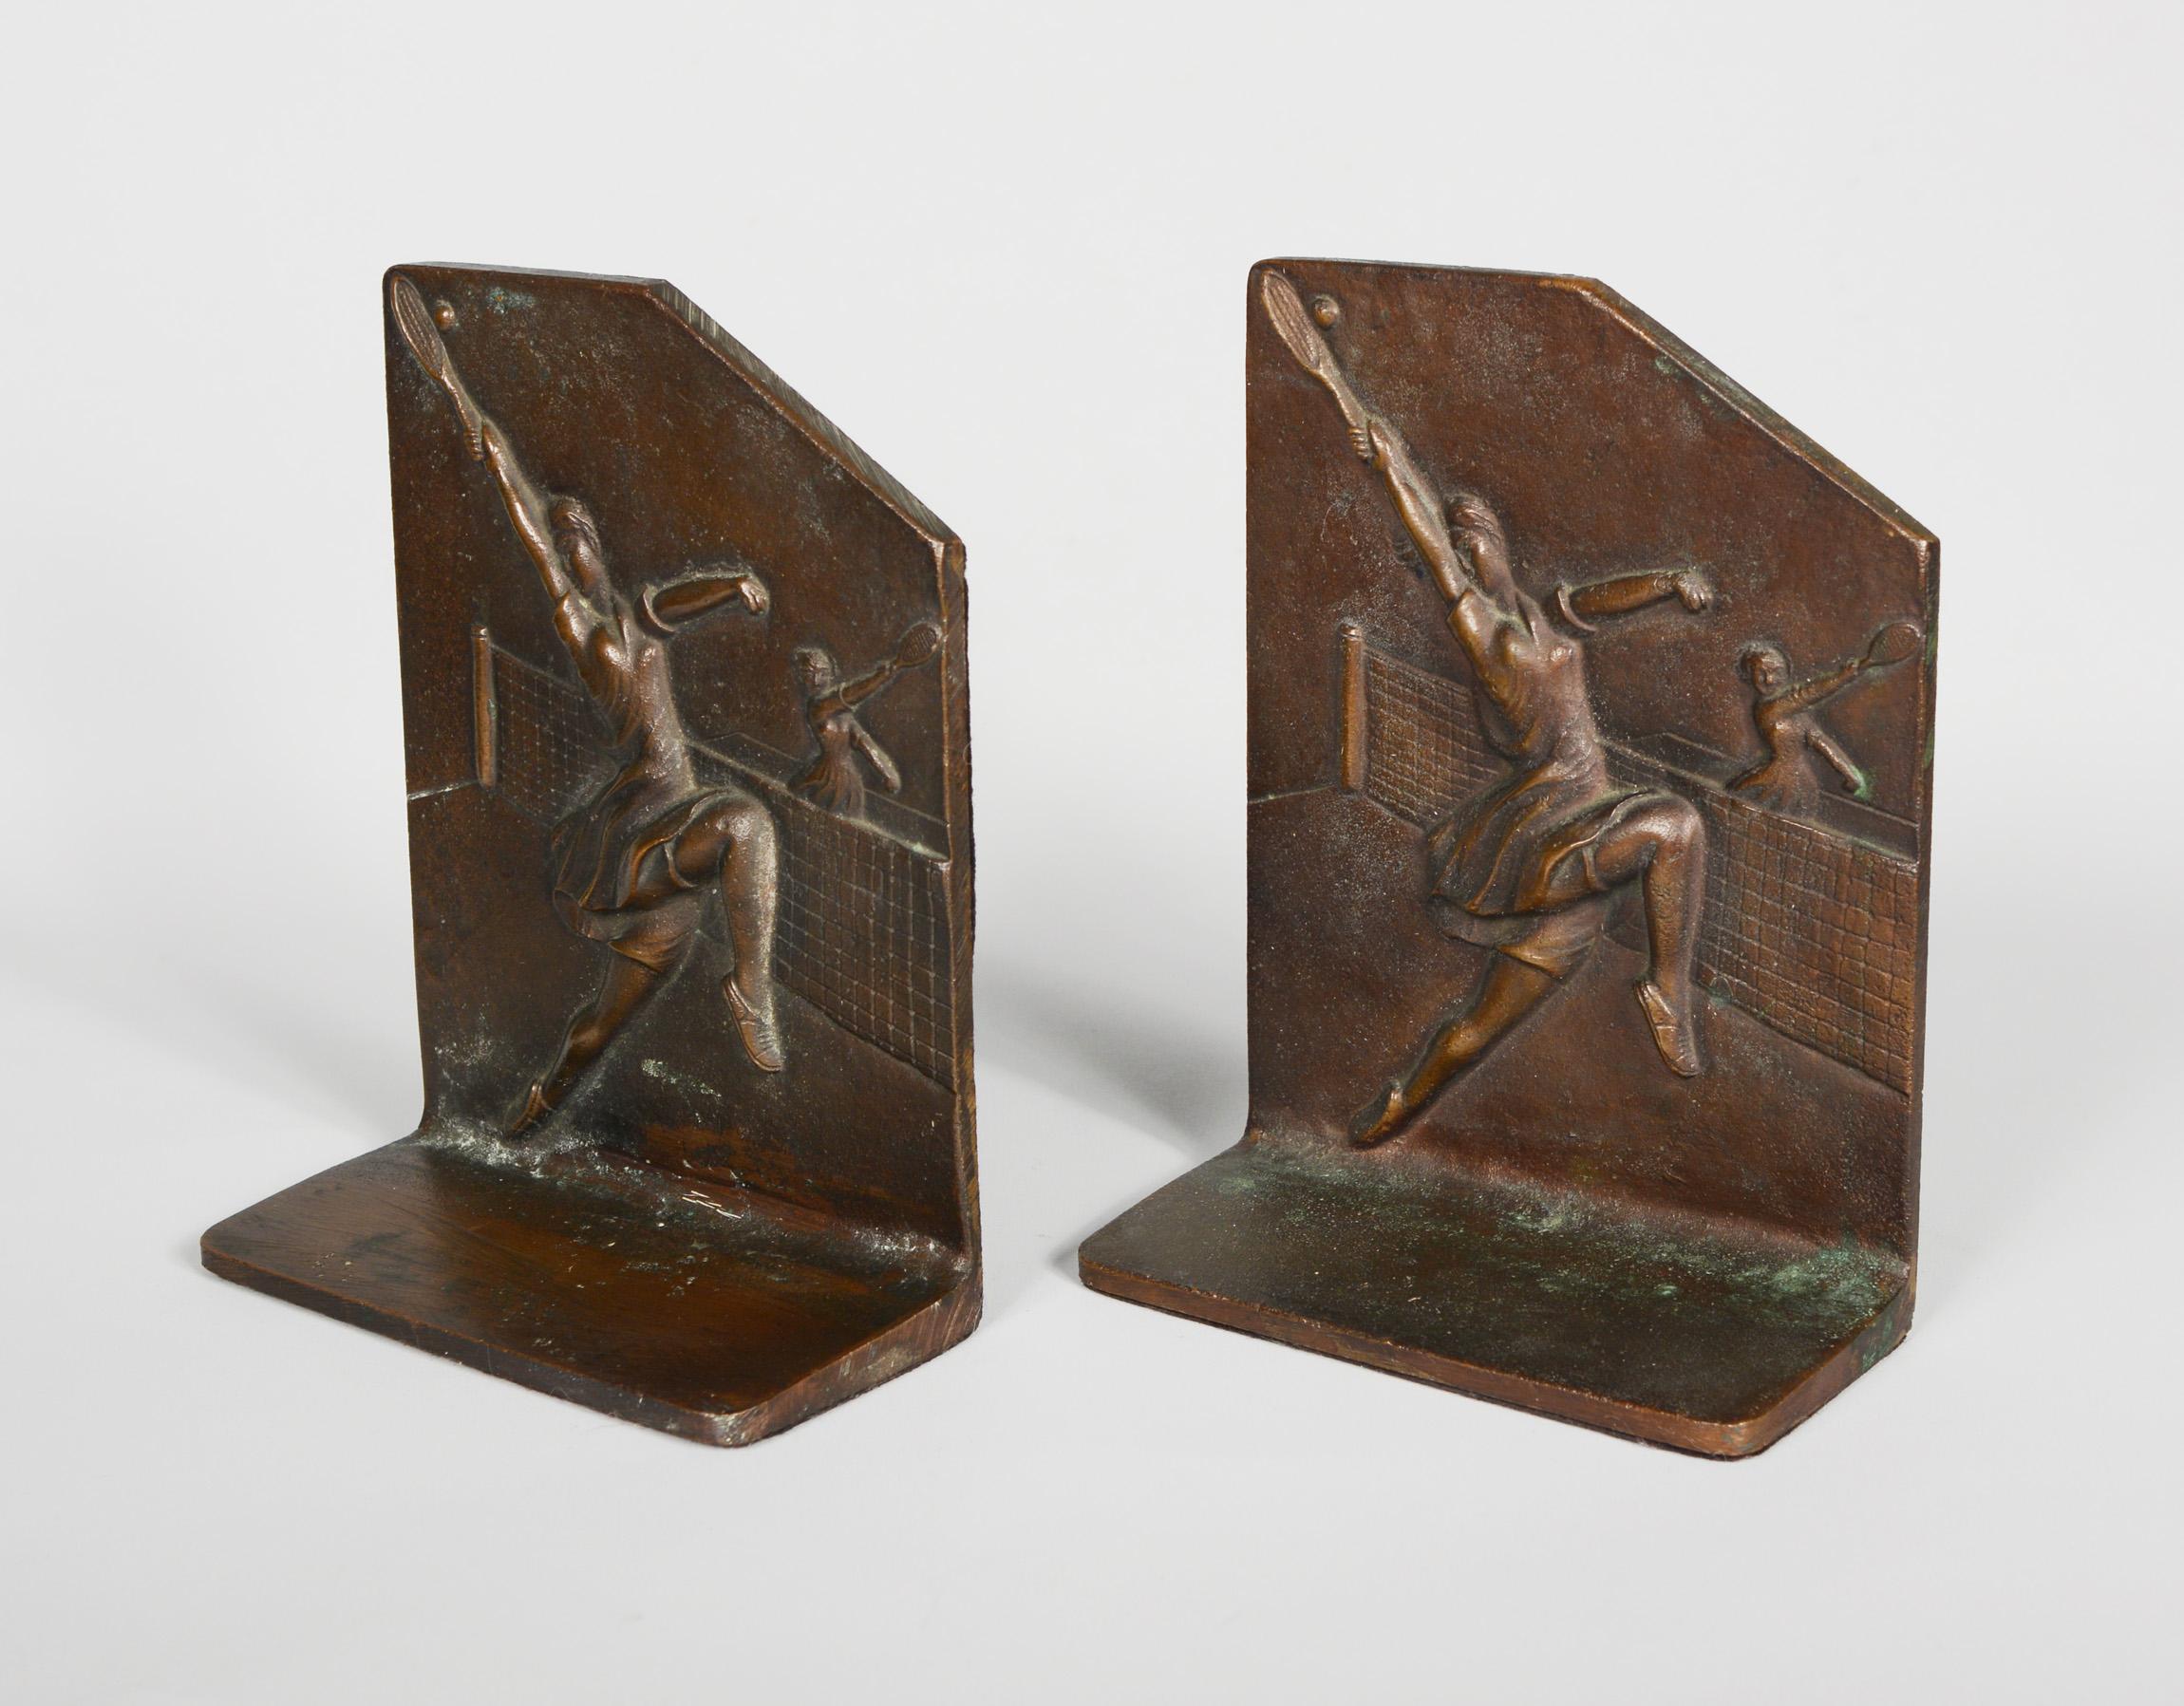 Pair of bronze bookends with women tennis players. These are not signed. They are tall making them good for larger books. There is a little oxidation in spots.